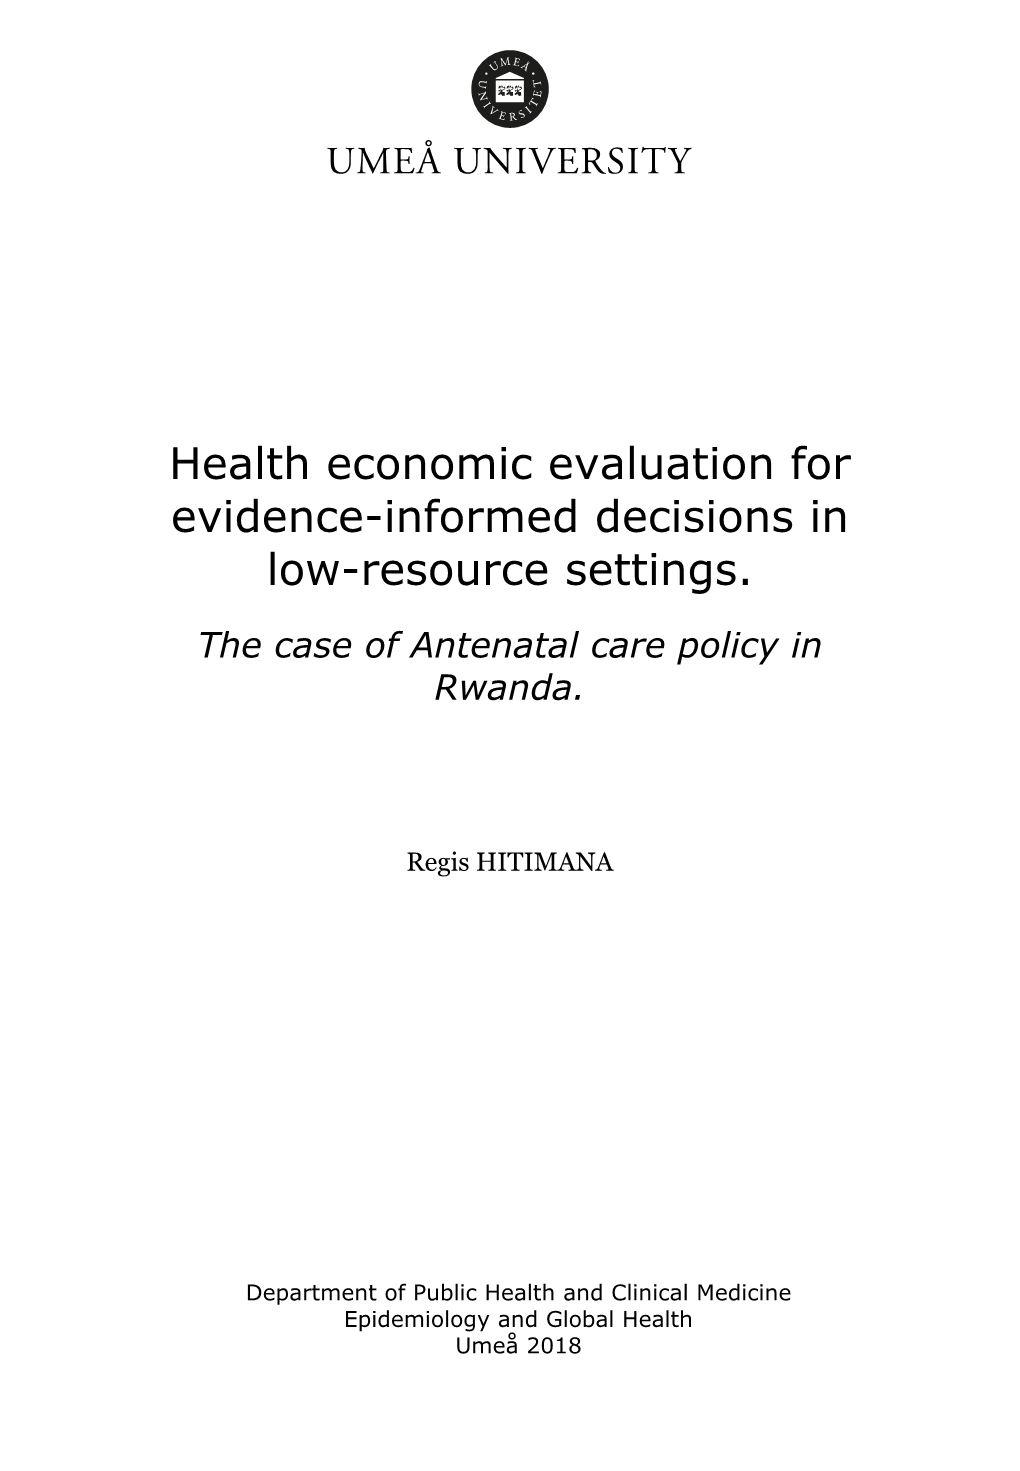 Health Economic Evaluation for Evidence-Informed Decisions in Low-Resource Settings